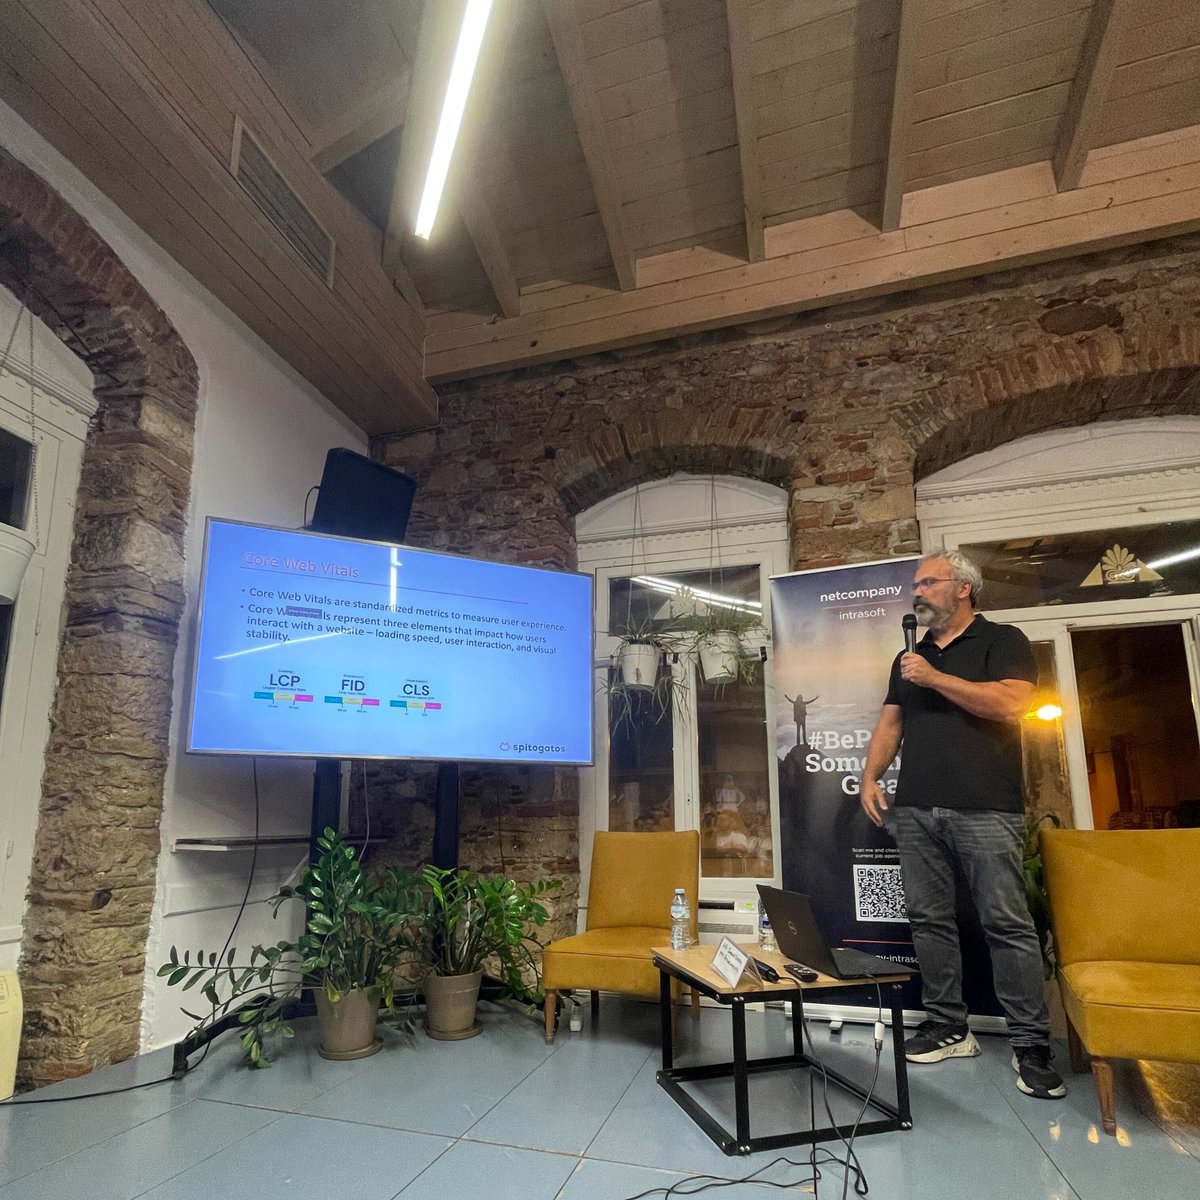 Next on stage... Giorgos Seriatos & Panagiotis Gkatzelidis talking about 'Building a large scale customer facing portal using #Nuxt/#VueJS technologies and an AWS based microservices architecture' #GreeceJS #meetup #tech #community #javascript #js #web #dev #frontend #design #ux